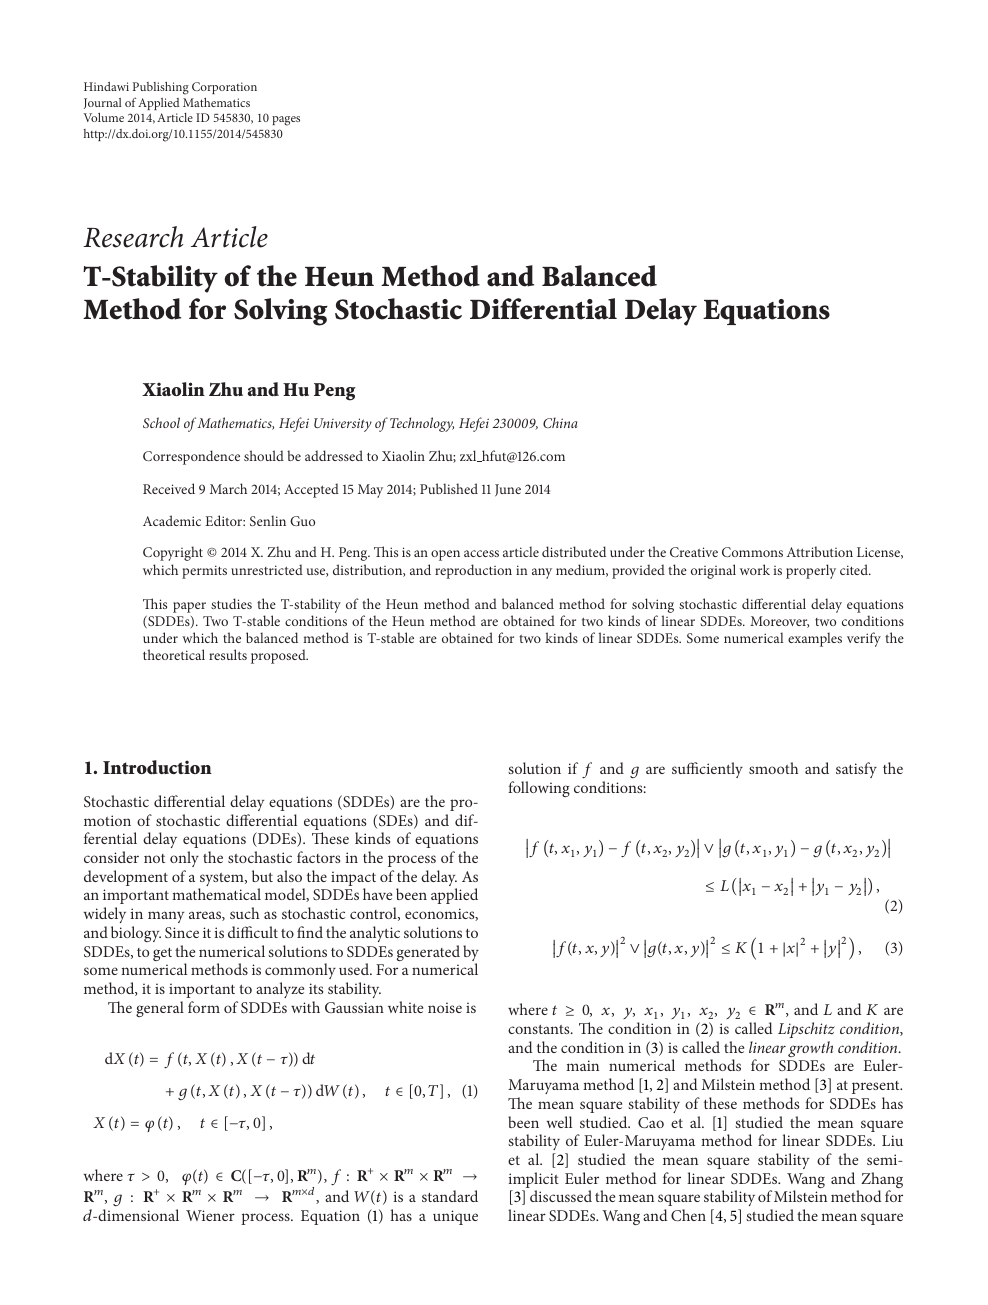 T Stability Of The Heun Method And Balanced Method For Solving Stochastic Differential Delay Equations Topic Of Research Paper In Mathematics Download Scholarly Article Pdf And Read For Free On Cyberleninka Open